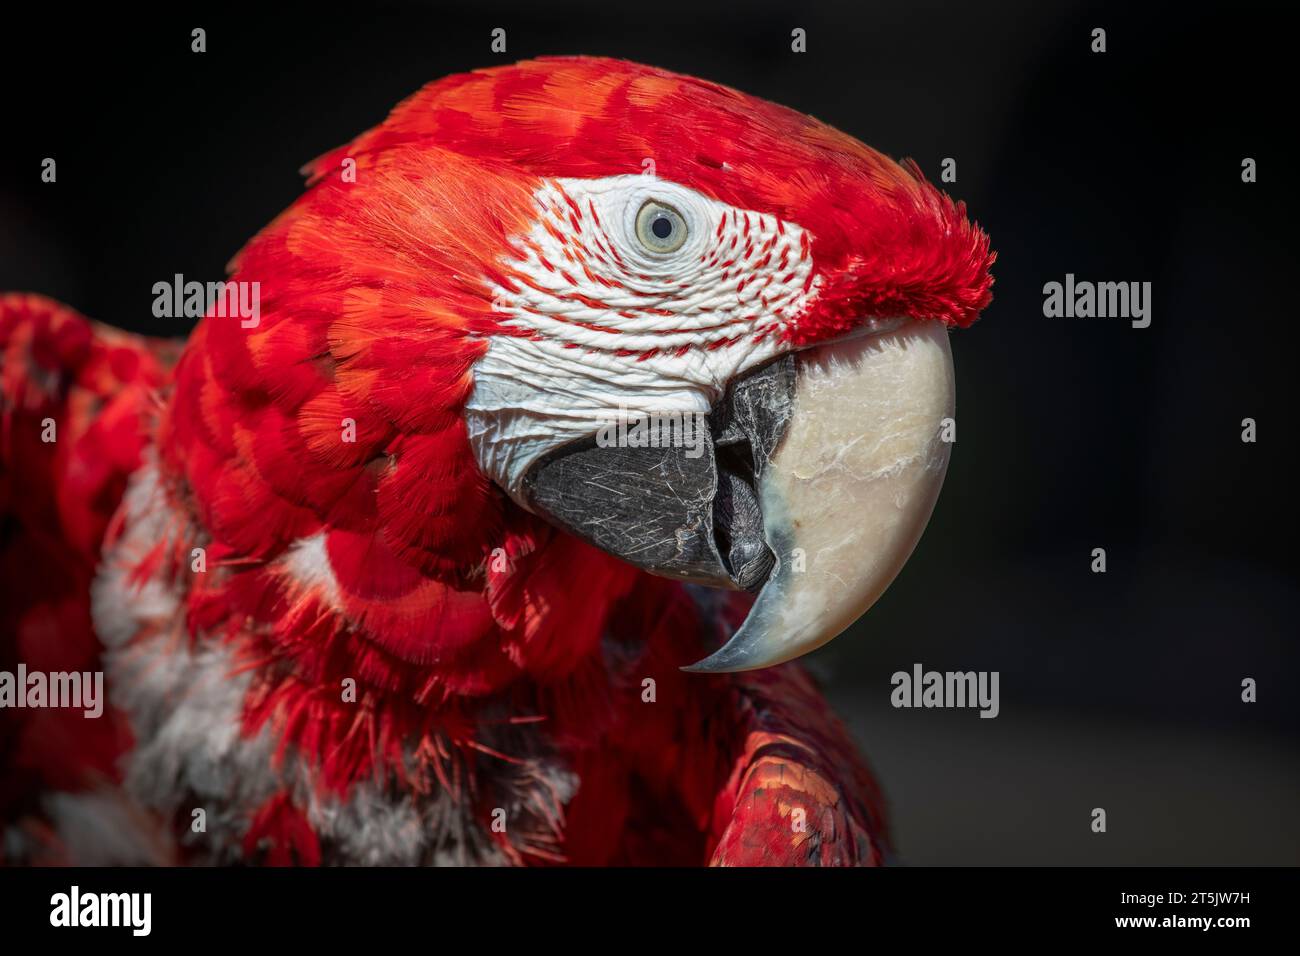 a close up portrait of a scarlet macaw, Ara macao. It shows just the head and side face in detail. The background is dark with space for text Stock Photo